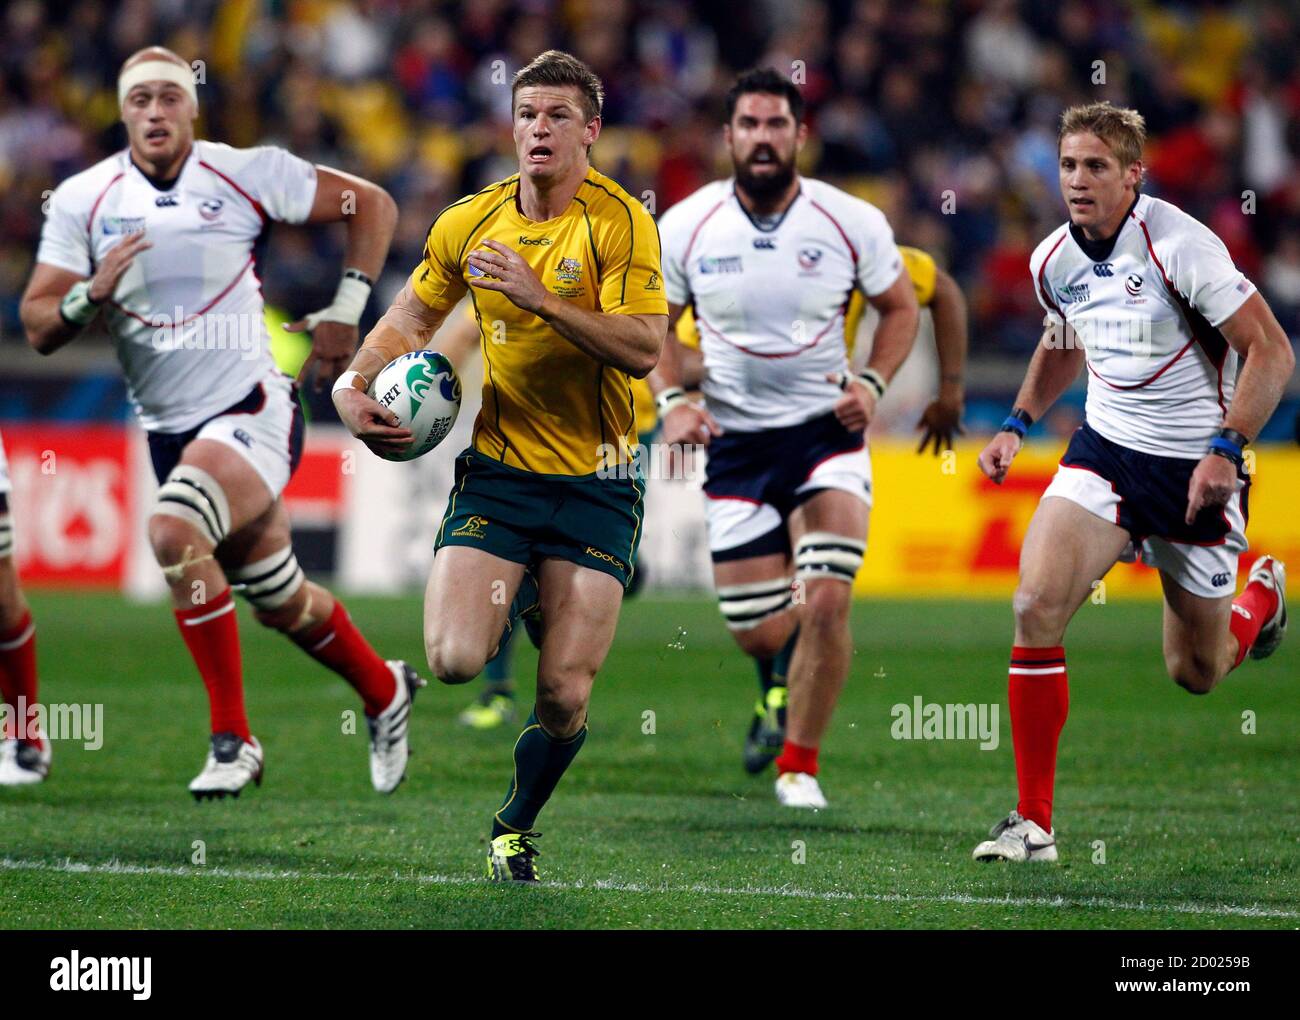 Australia Wallabies' Rob Horne runs with the ball during their Rugby World Cup Pool C match against the U.S. at Wellington Regional Stadium in Wellington September 23, 2011. REUTERS/David Gray (NEW ZEALAND  - Tags: SPORT RUGBY) Stock Photo